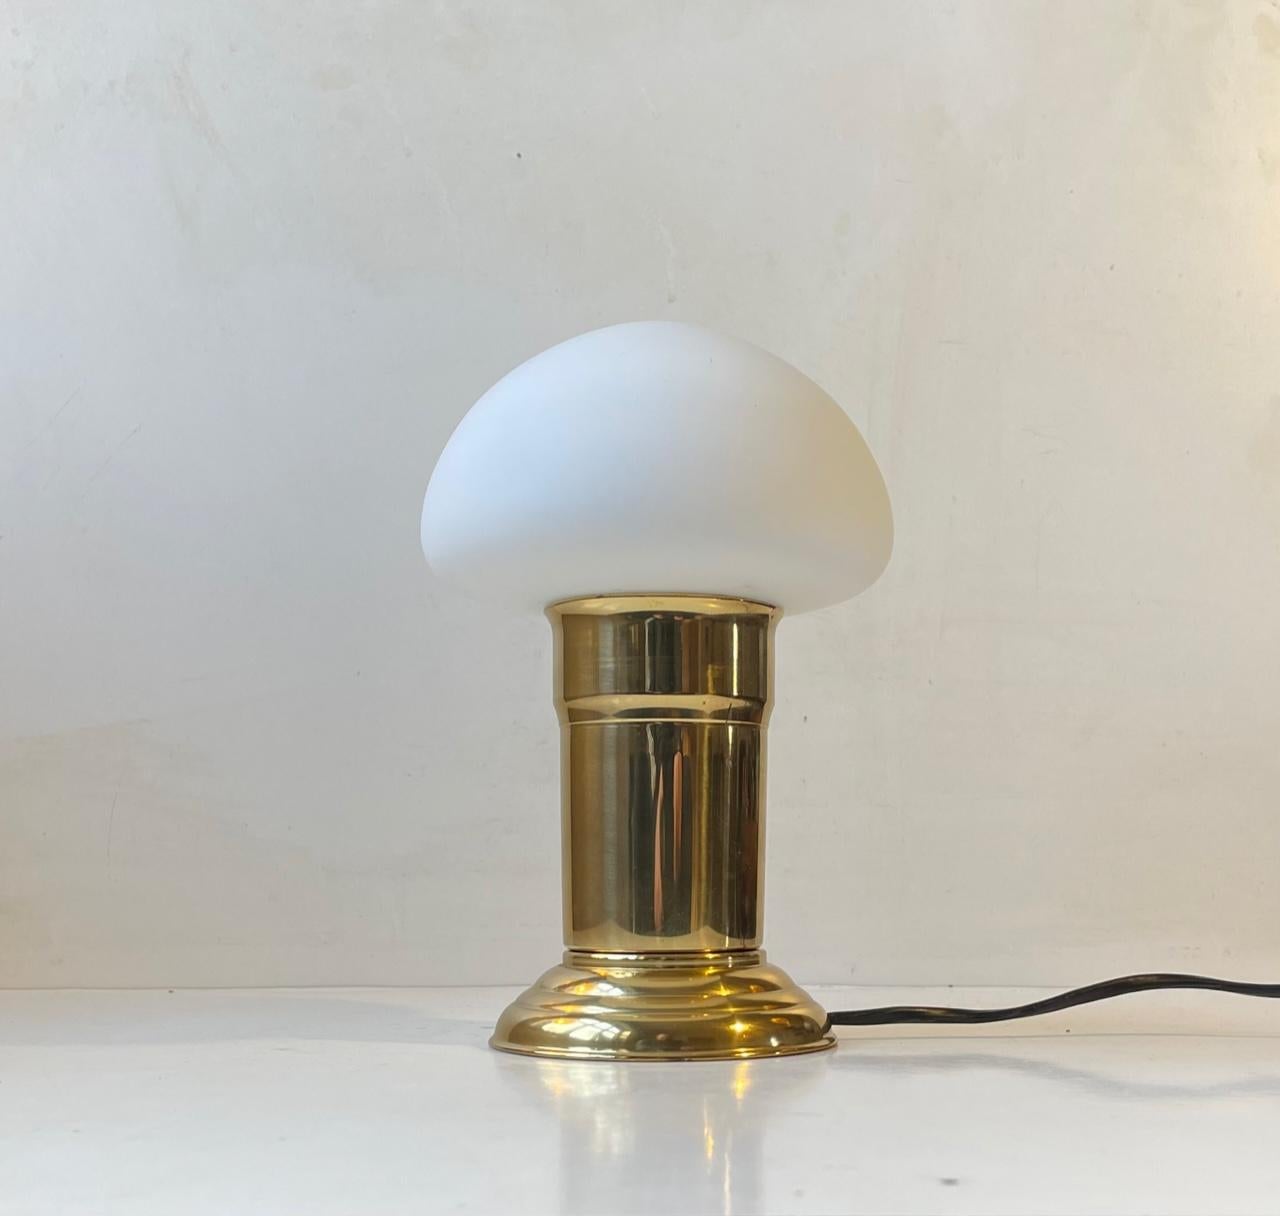 Unusual and petite table light executed in brass and featuring a mushroom shaped shade in matte/frosted glass. It has an on/of switch to its cord. Unknown Scandinavian maker/design circa 1970-80. Measurements: H: 24 cm, D: 14 cm.

For the US. It